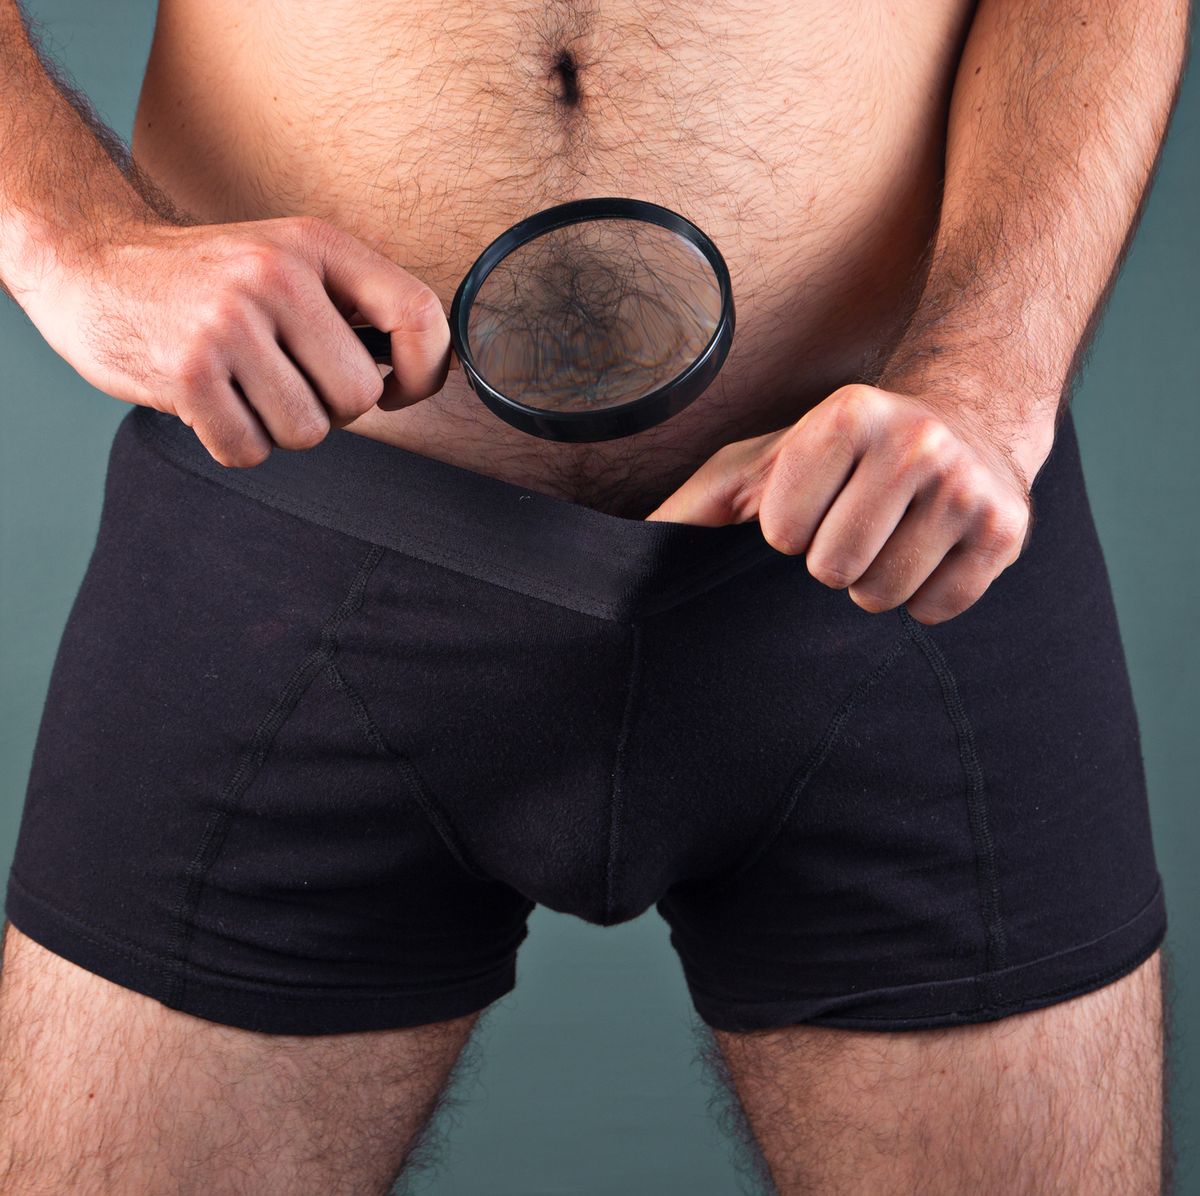 Why Ynside is the best circumcision underwear out there